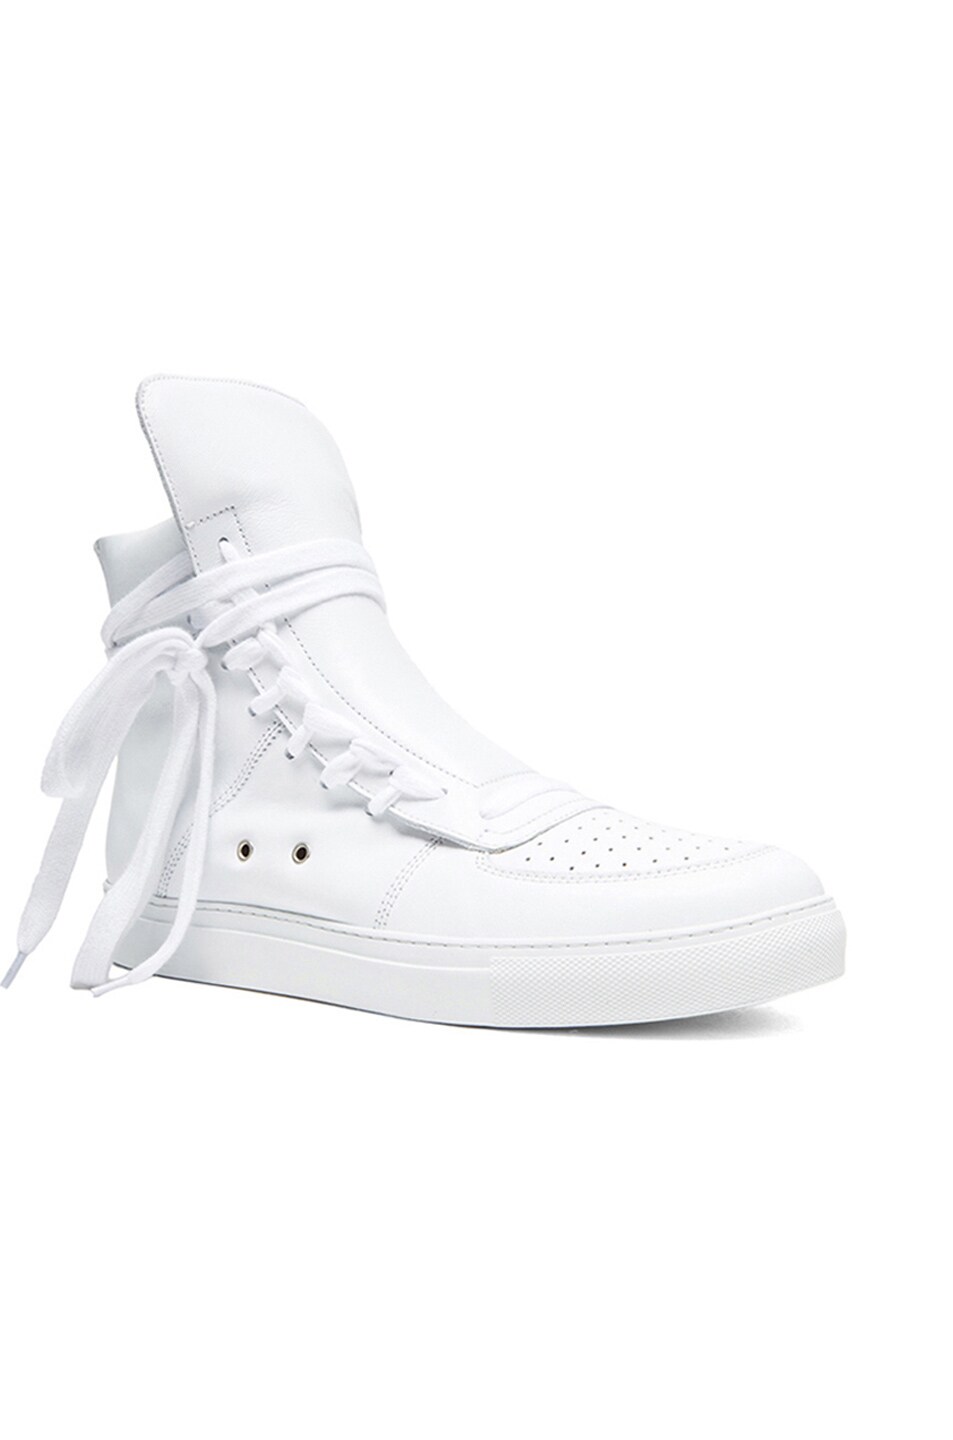 Image 1 of Kris Van Assche Laceless Leather High Top Sneakers in White